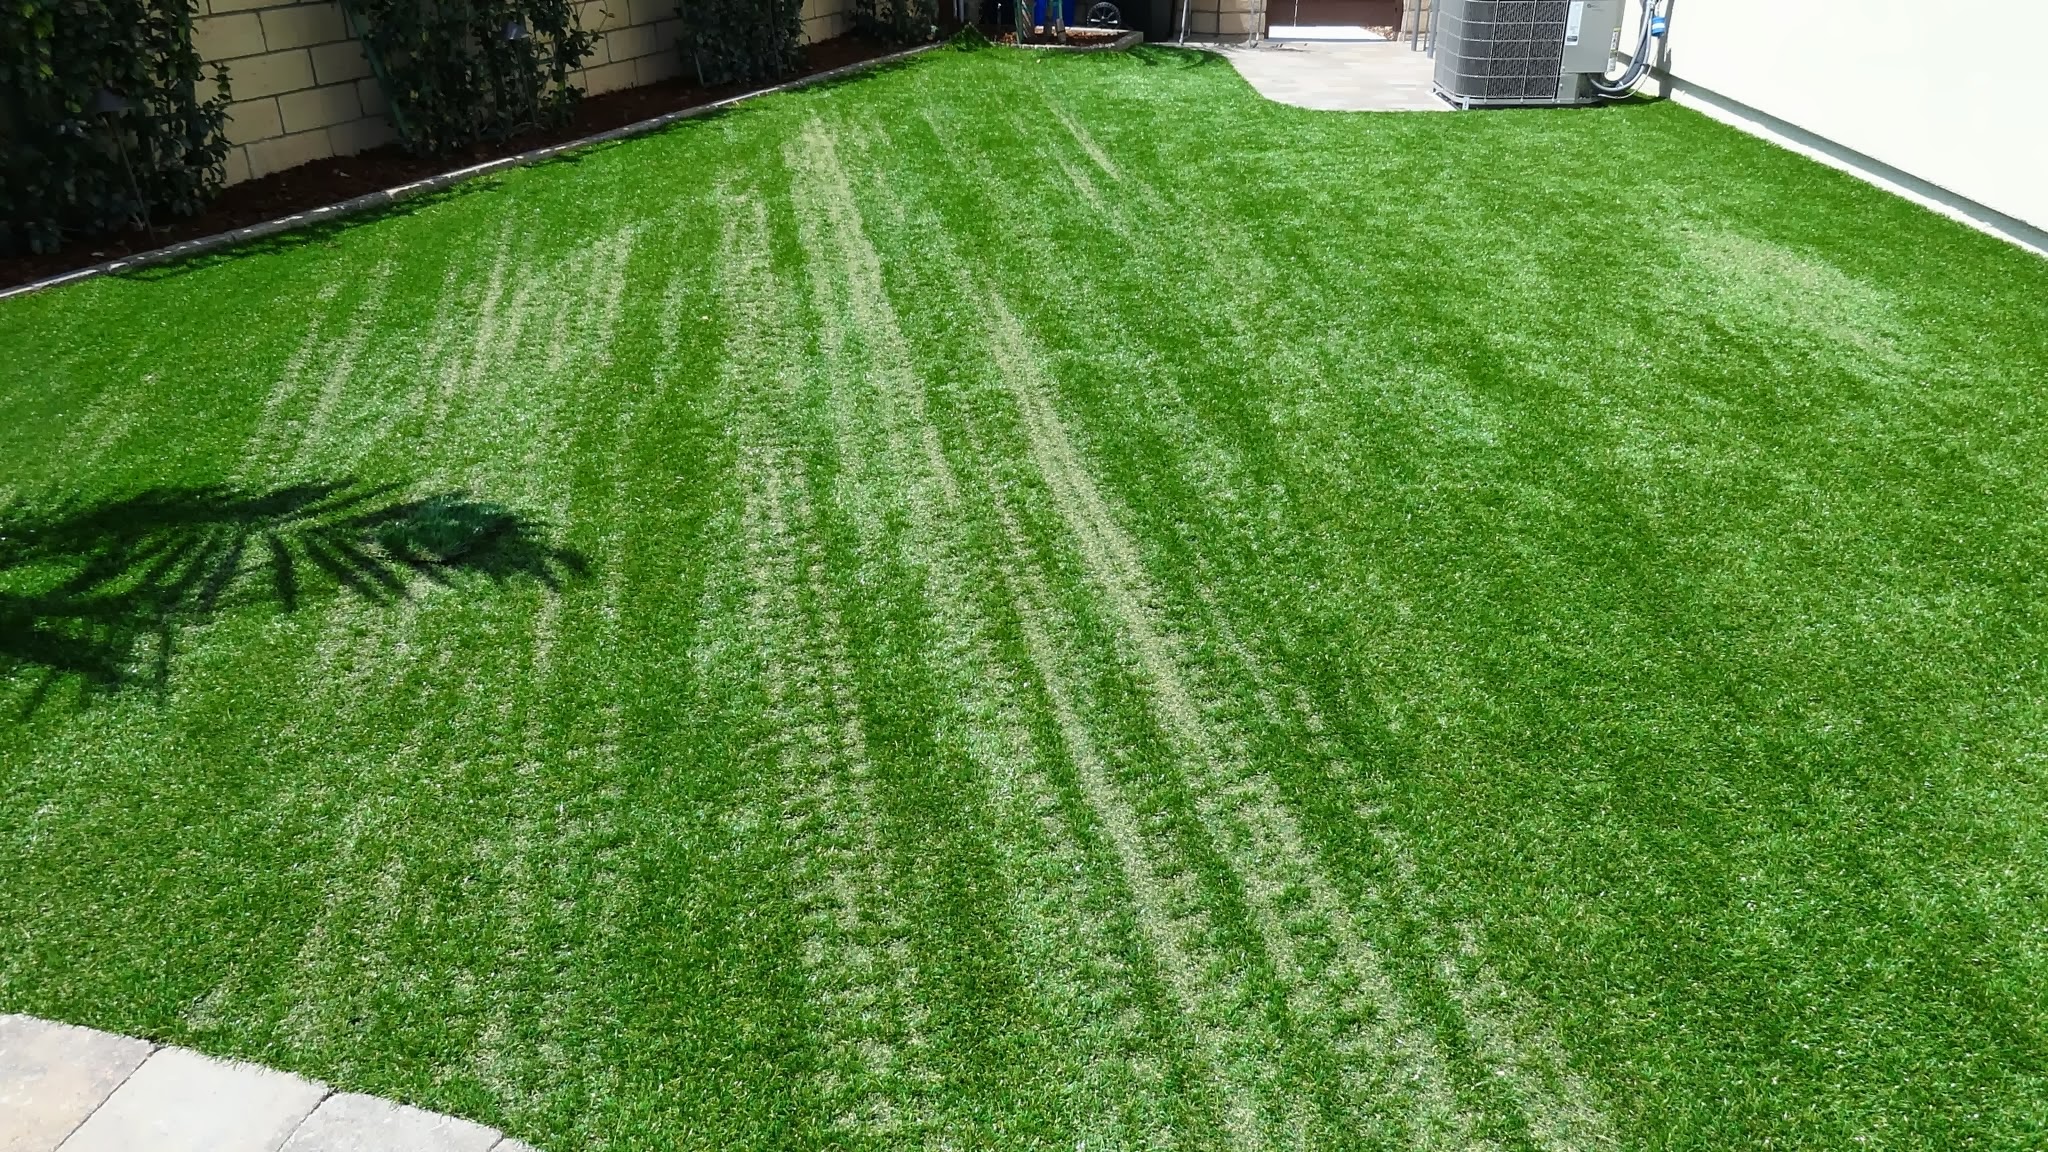 Here is what the Low E windows did to the Synthetic Turf